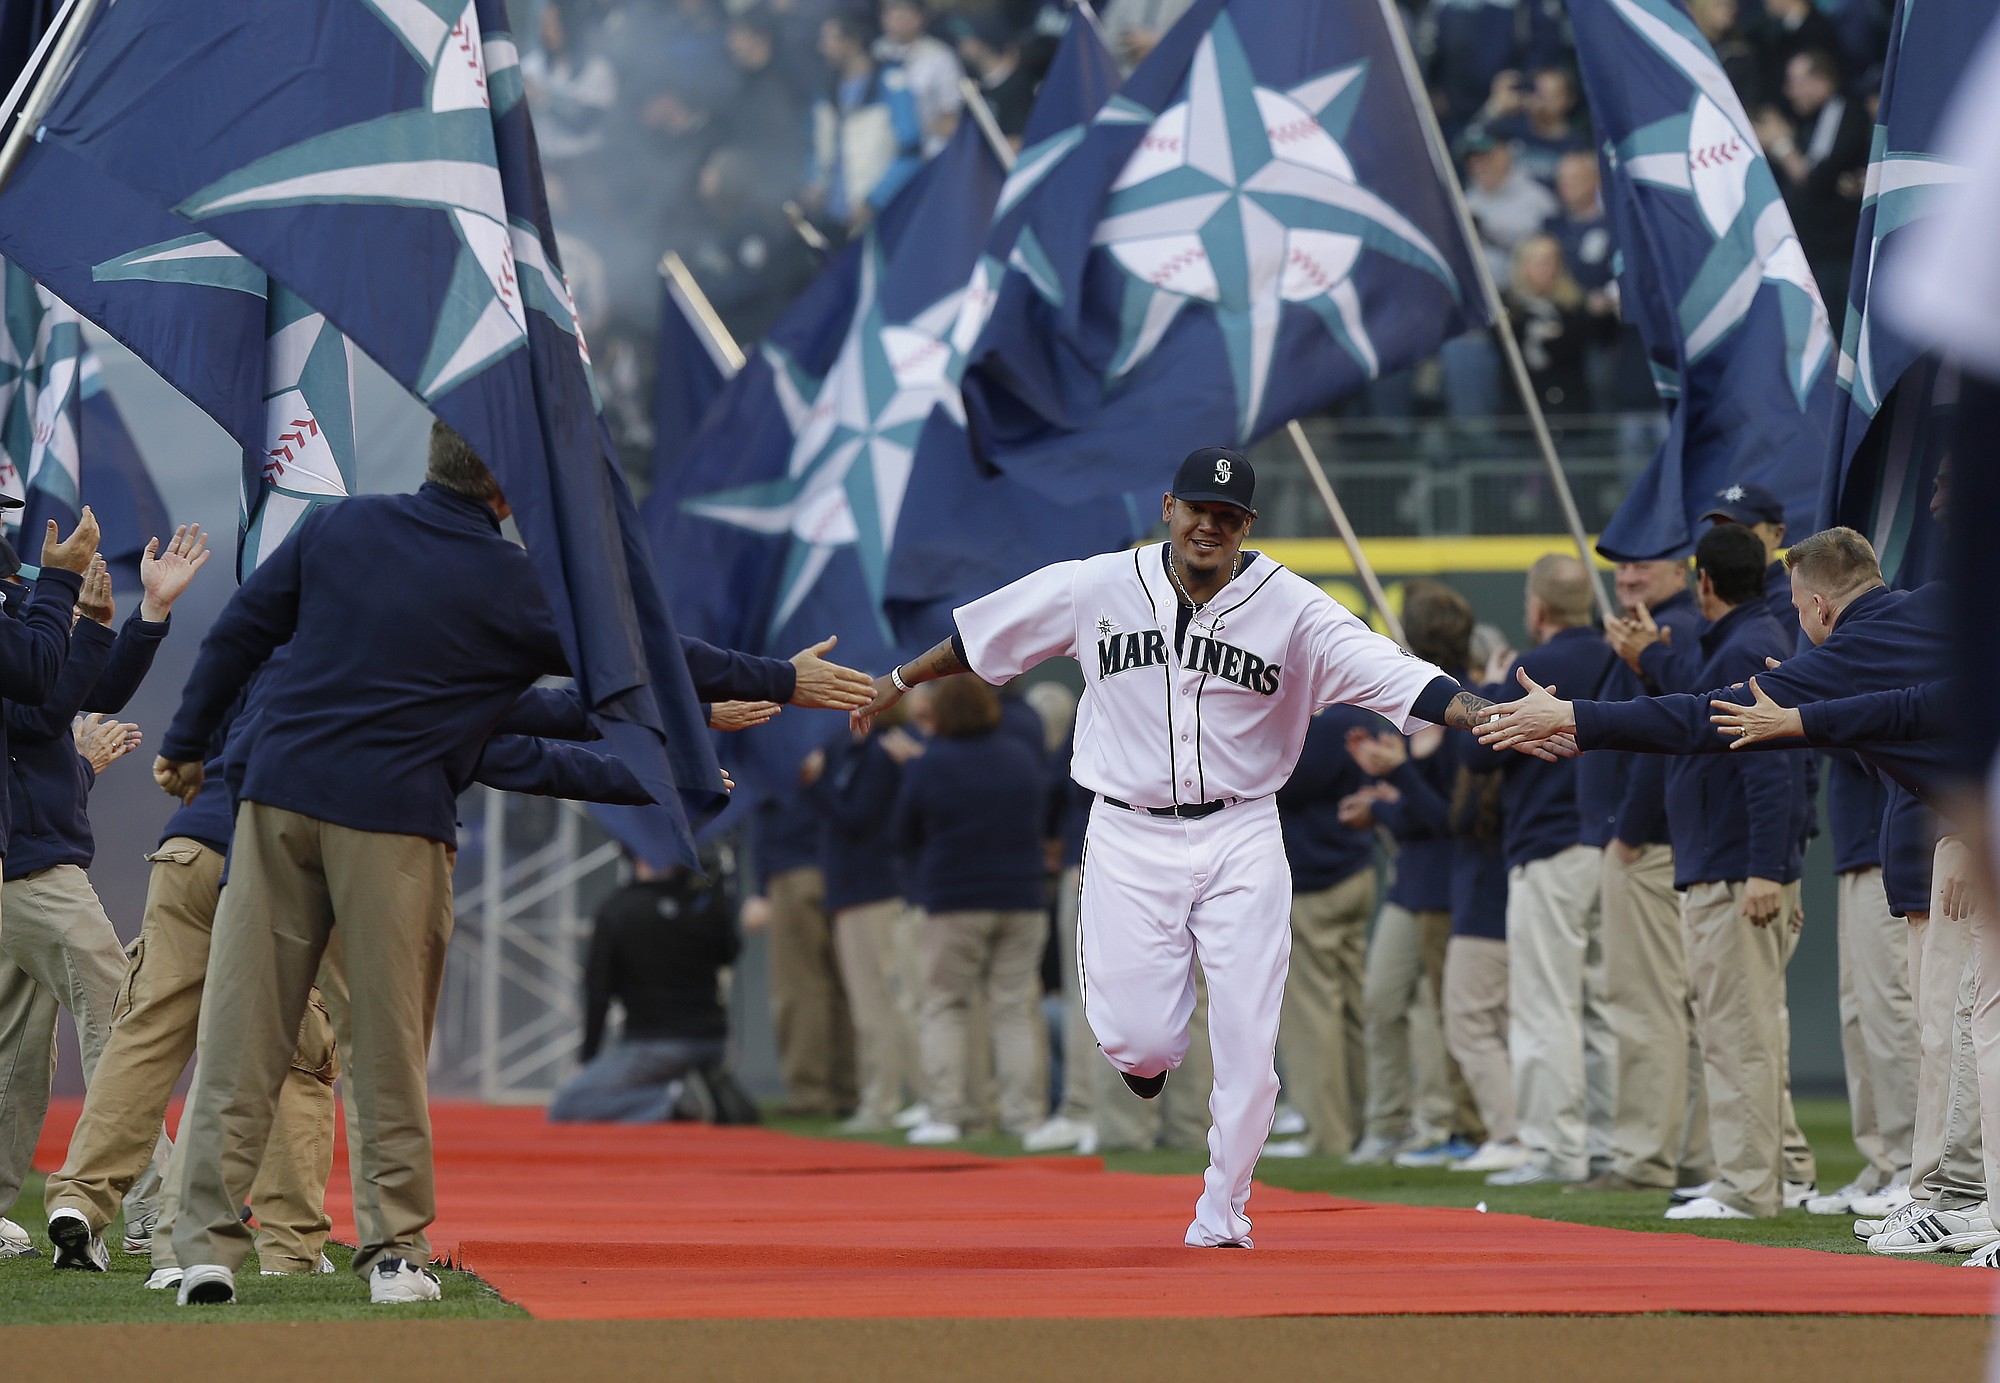 Seattle Mariners ace Felix Hernandez runs down the red carpet during team introductions prior to the Mariners' home opener against the Houston Astros on Monday.